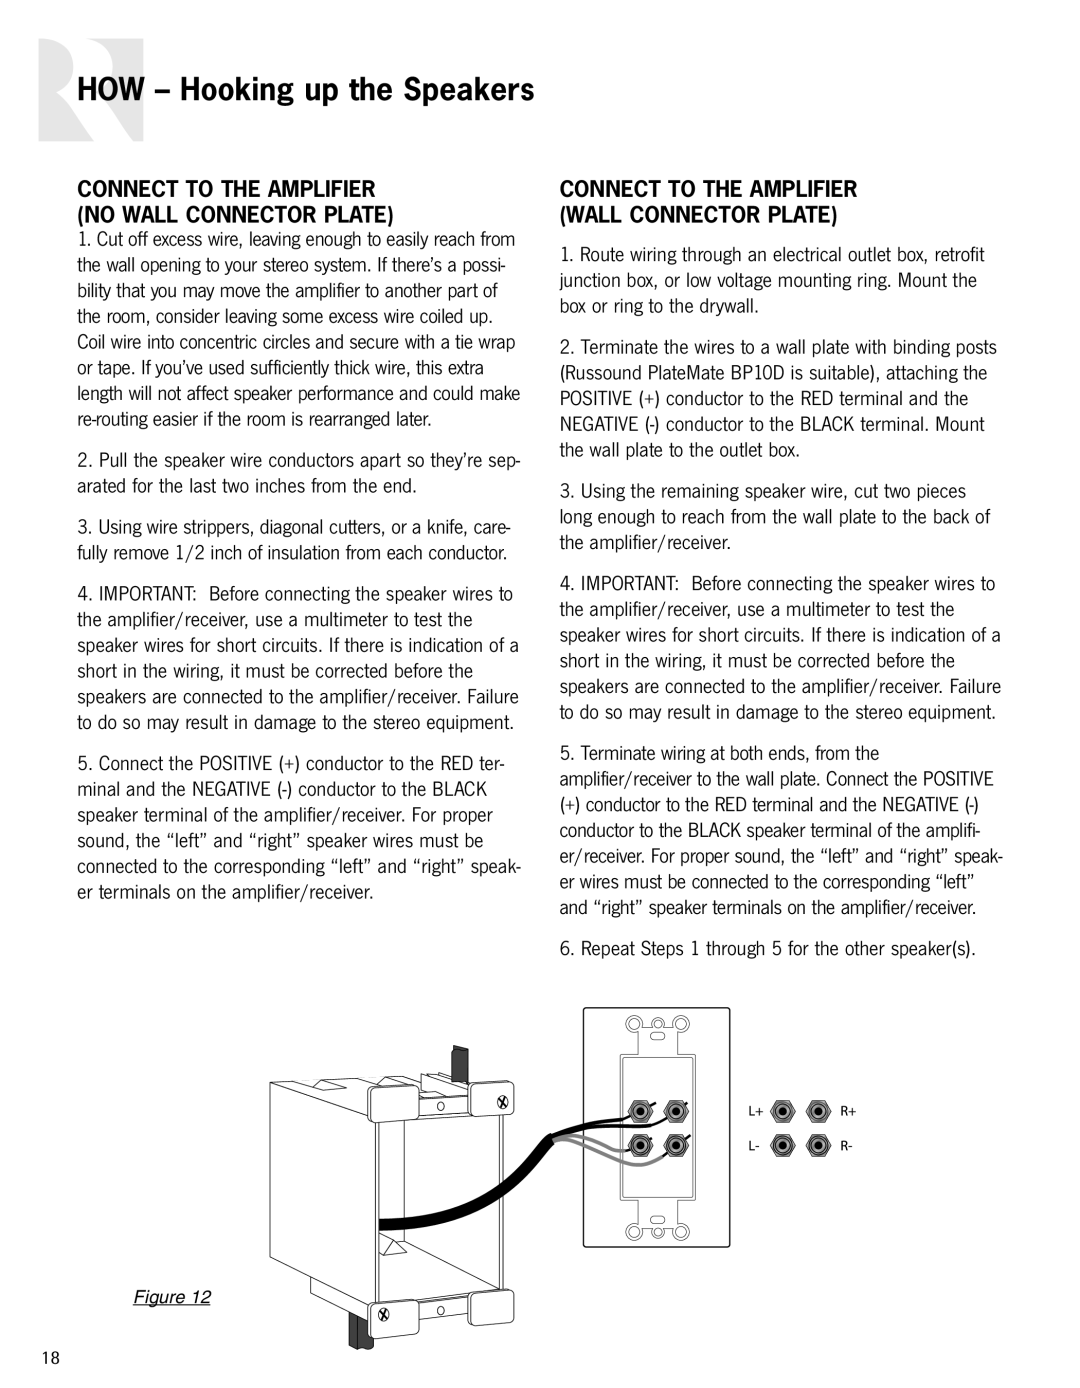 Russound Advantage Series owner manual HOW - Hooking up the Speakers, Connect To The Amplifier No Wall Connector Plate 